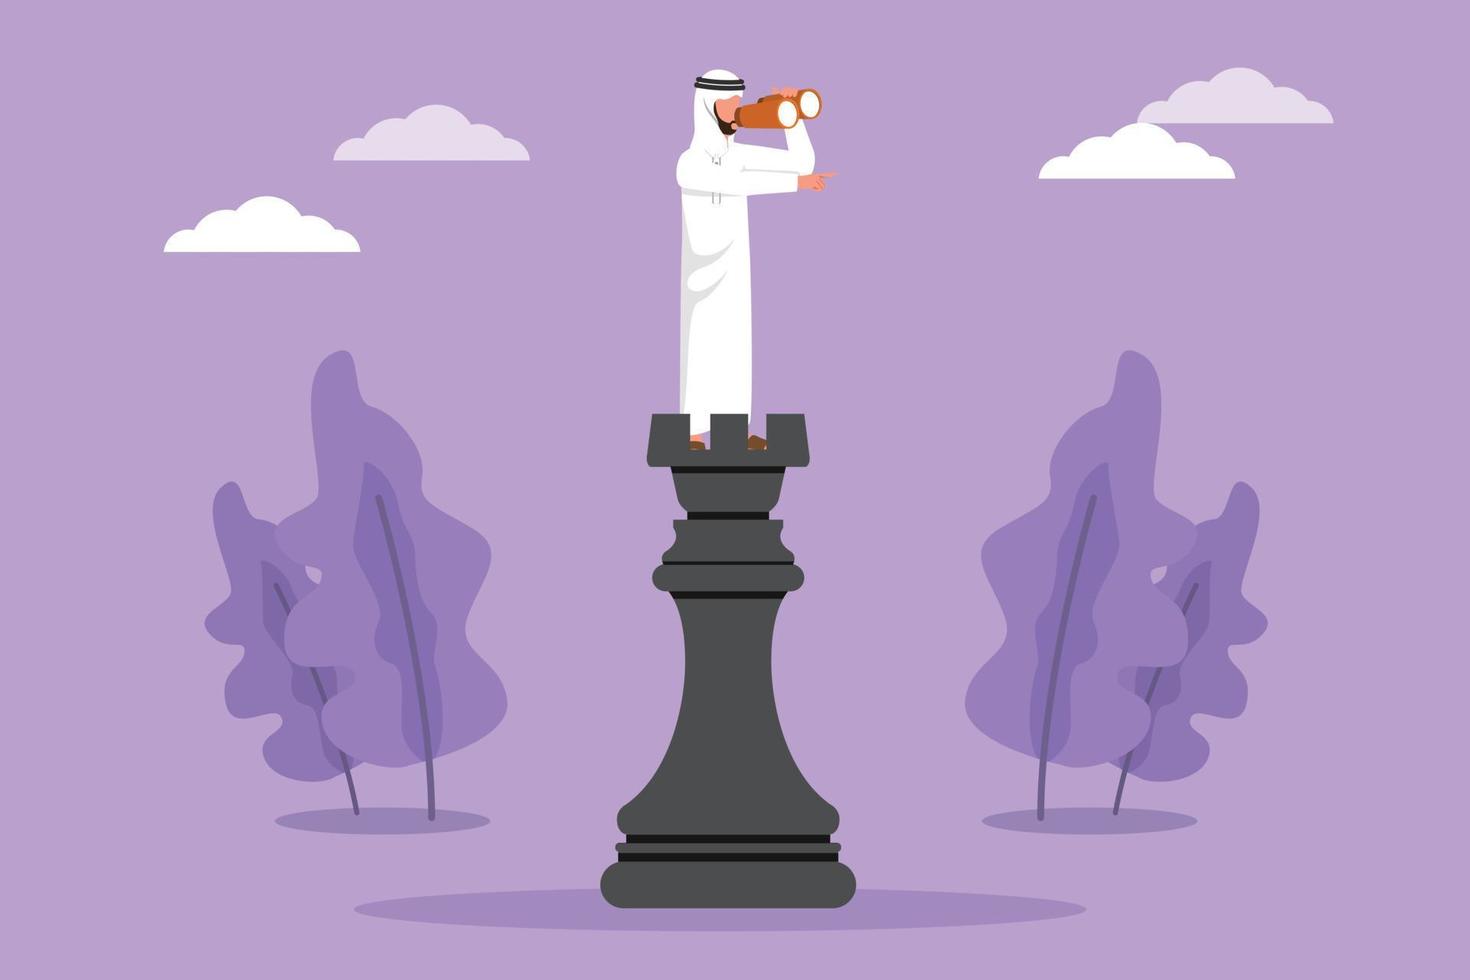 Cartoon flat style drawing smart Arabian businessman on top of big rook chess piece using telescope looking for success, goals opportunities, future business trends. Graphic design vector illustration